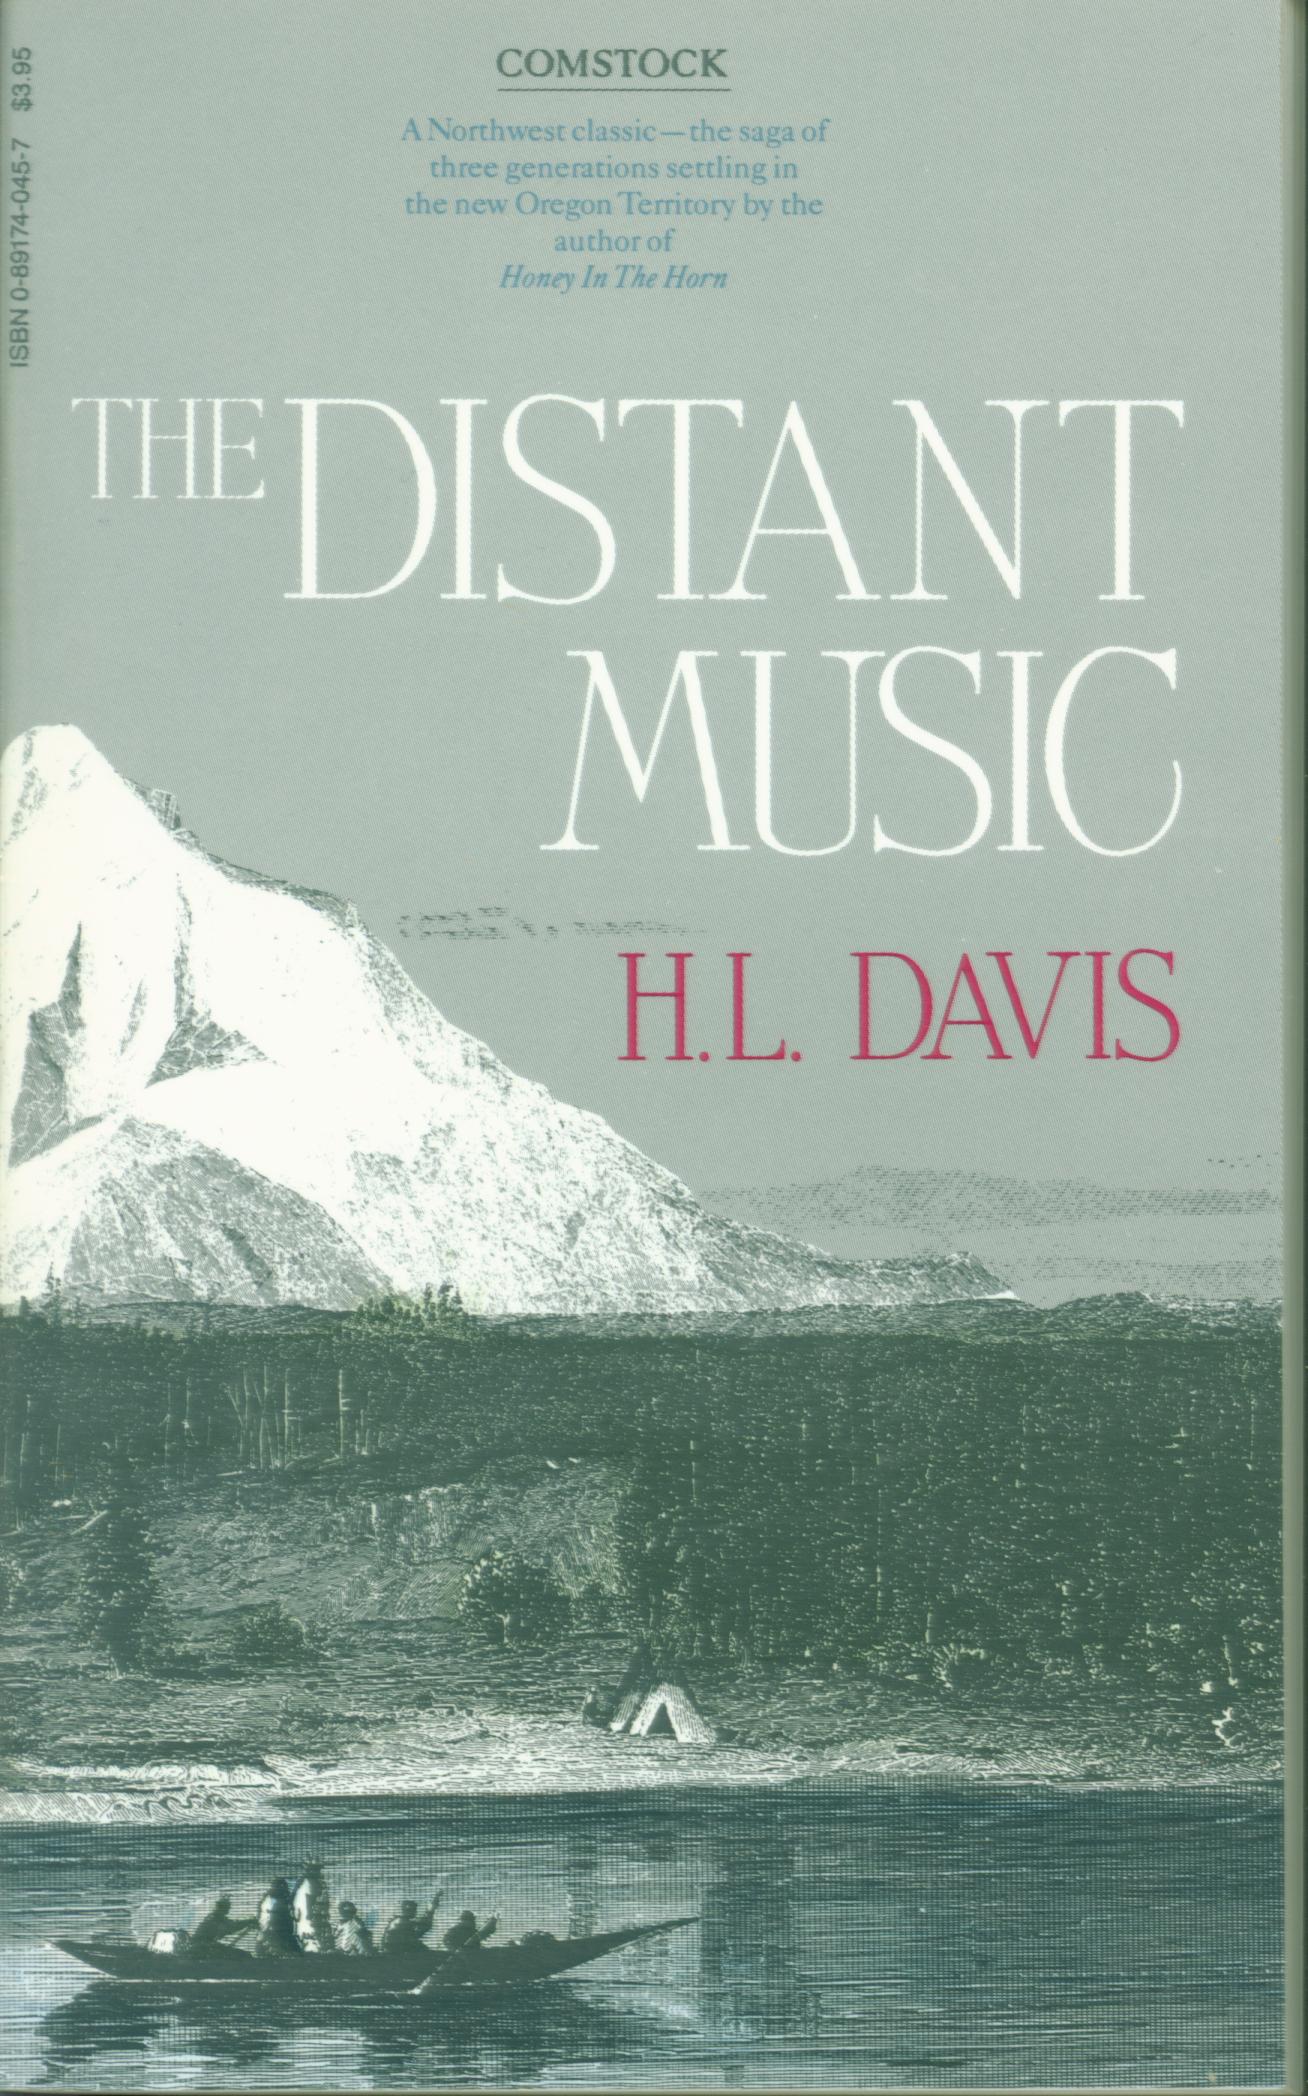 THE DISTANT MUSIC